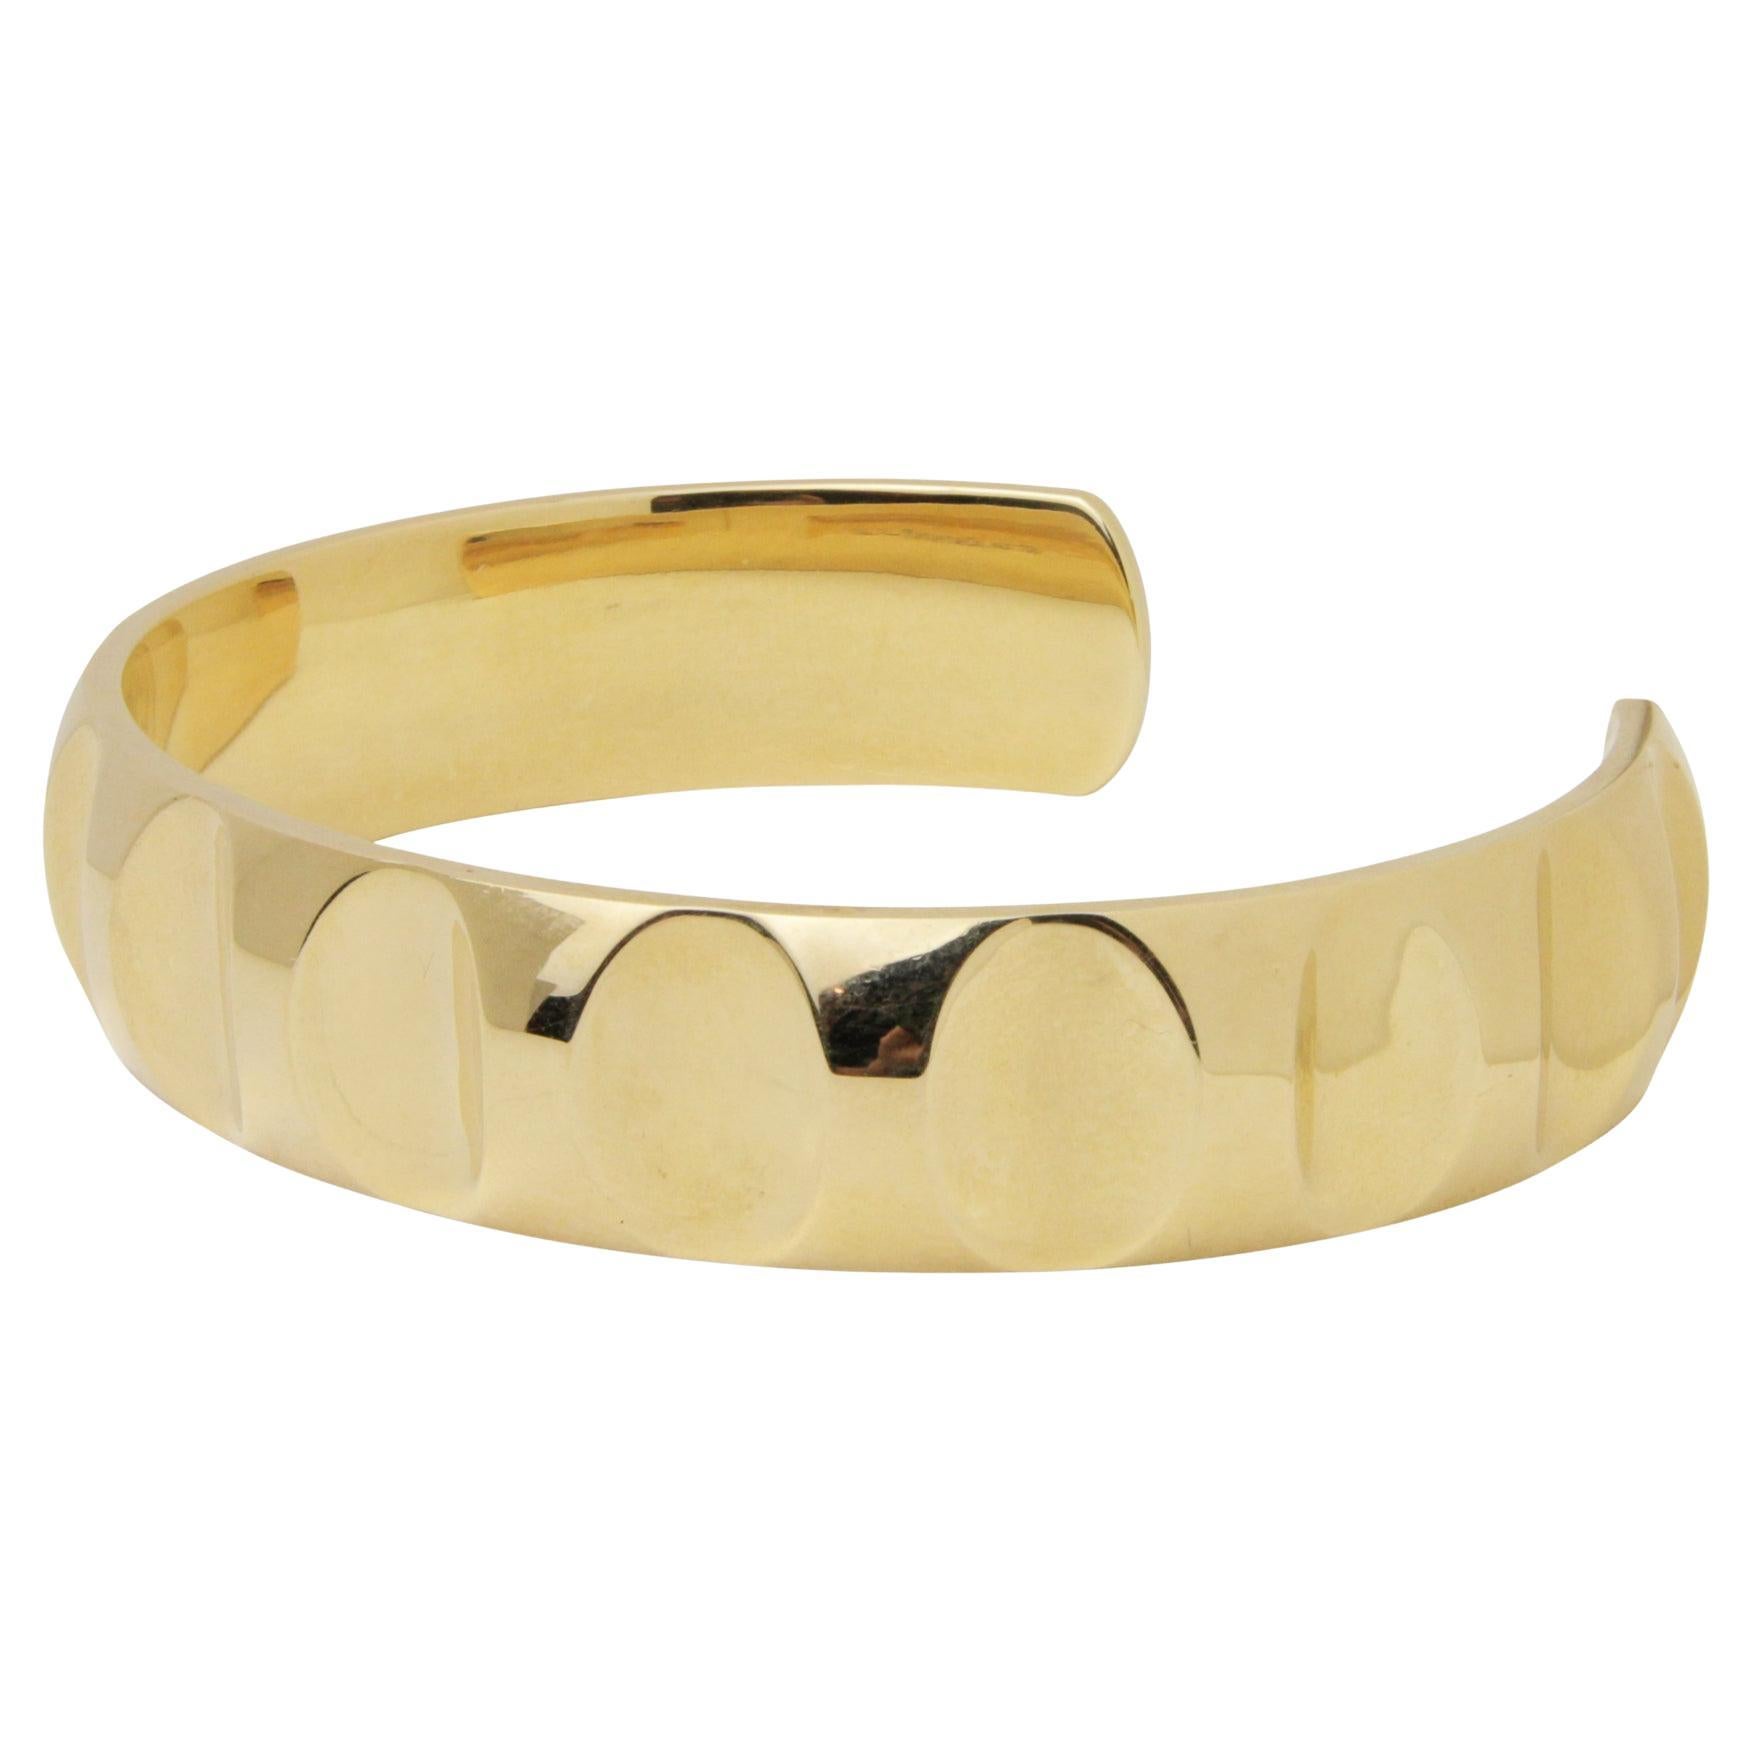 Classic & stylish, this wonderful 18k yellow gold Groove cuff by Paloma Picasso for Tiffany & Co will become your signature look. Superbly crafted with simplicity, it makes a fabulous unisex piece. 
Paloma Picasso was known for her incredible